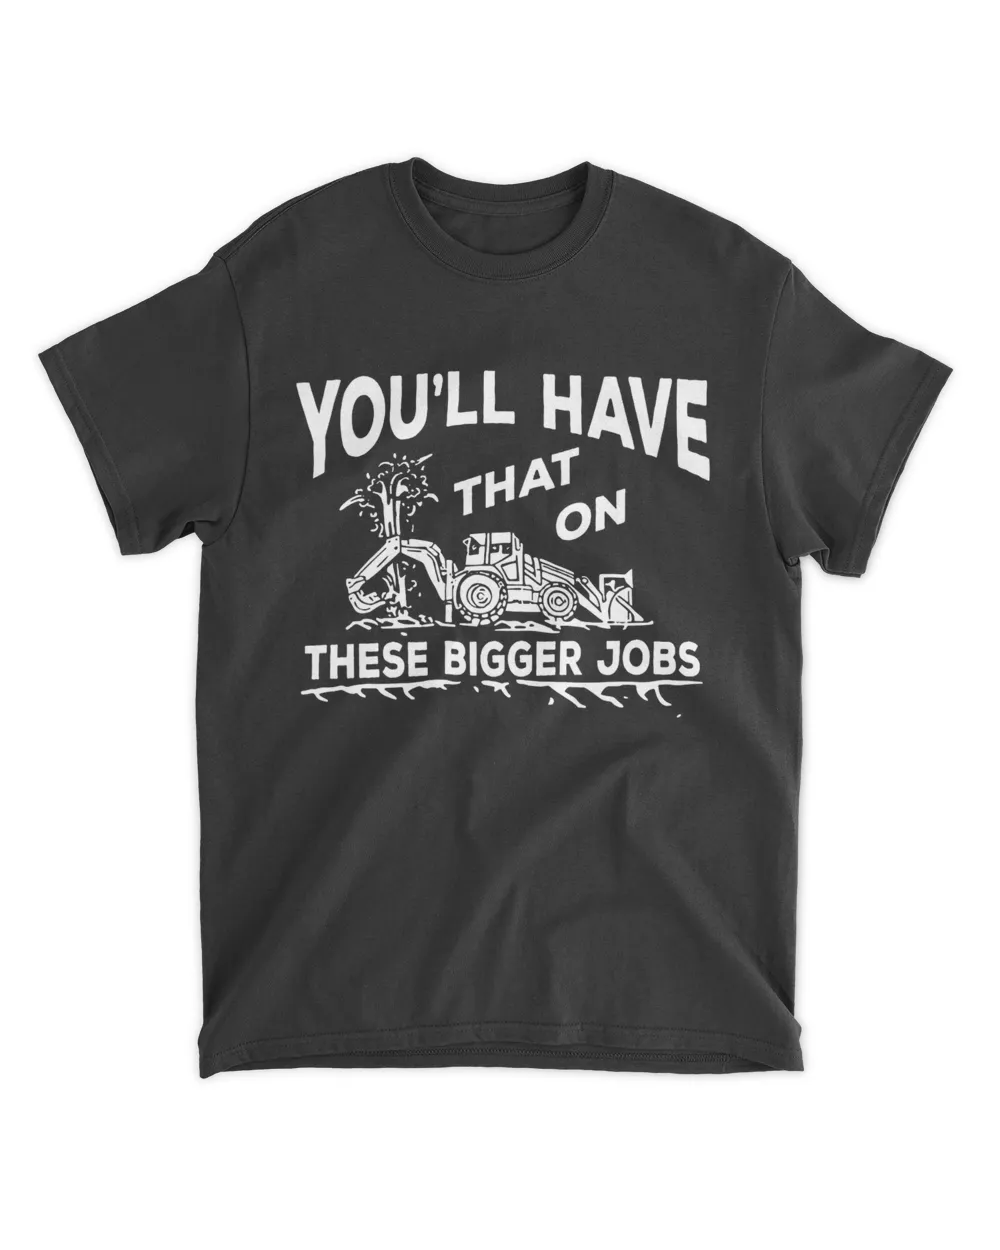 Black Tractor you'll have that on these bigger Jobs shirt